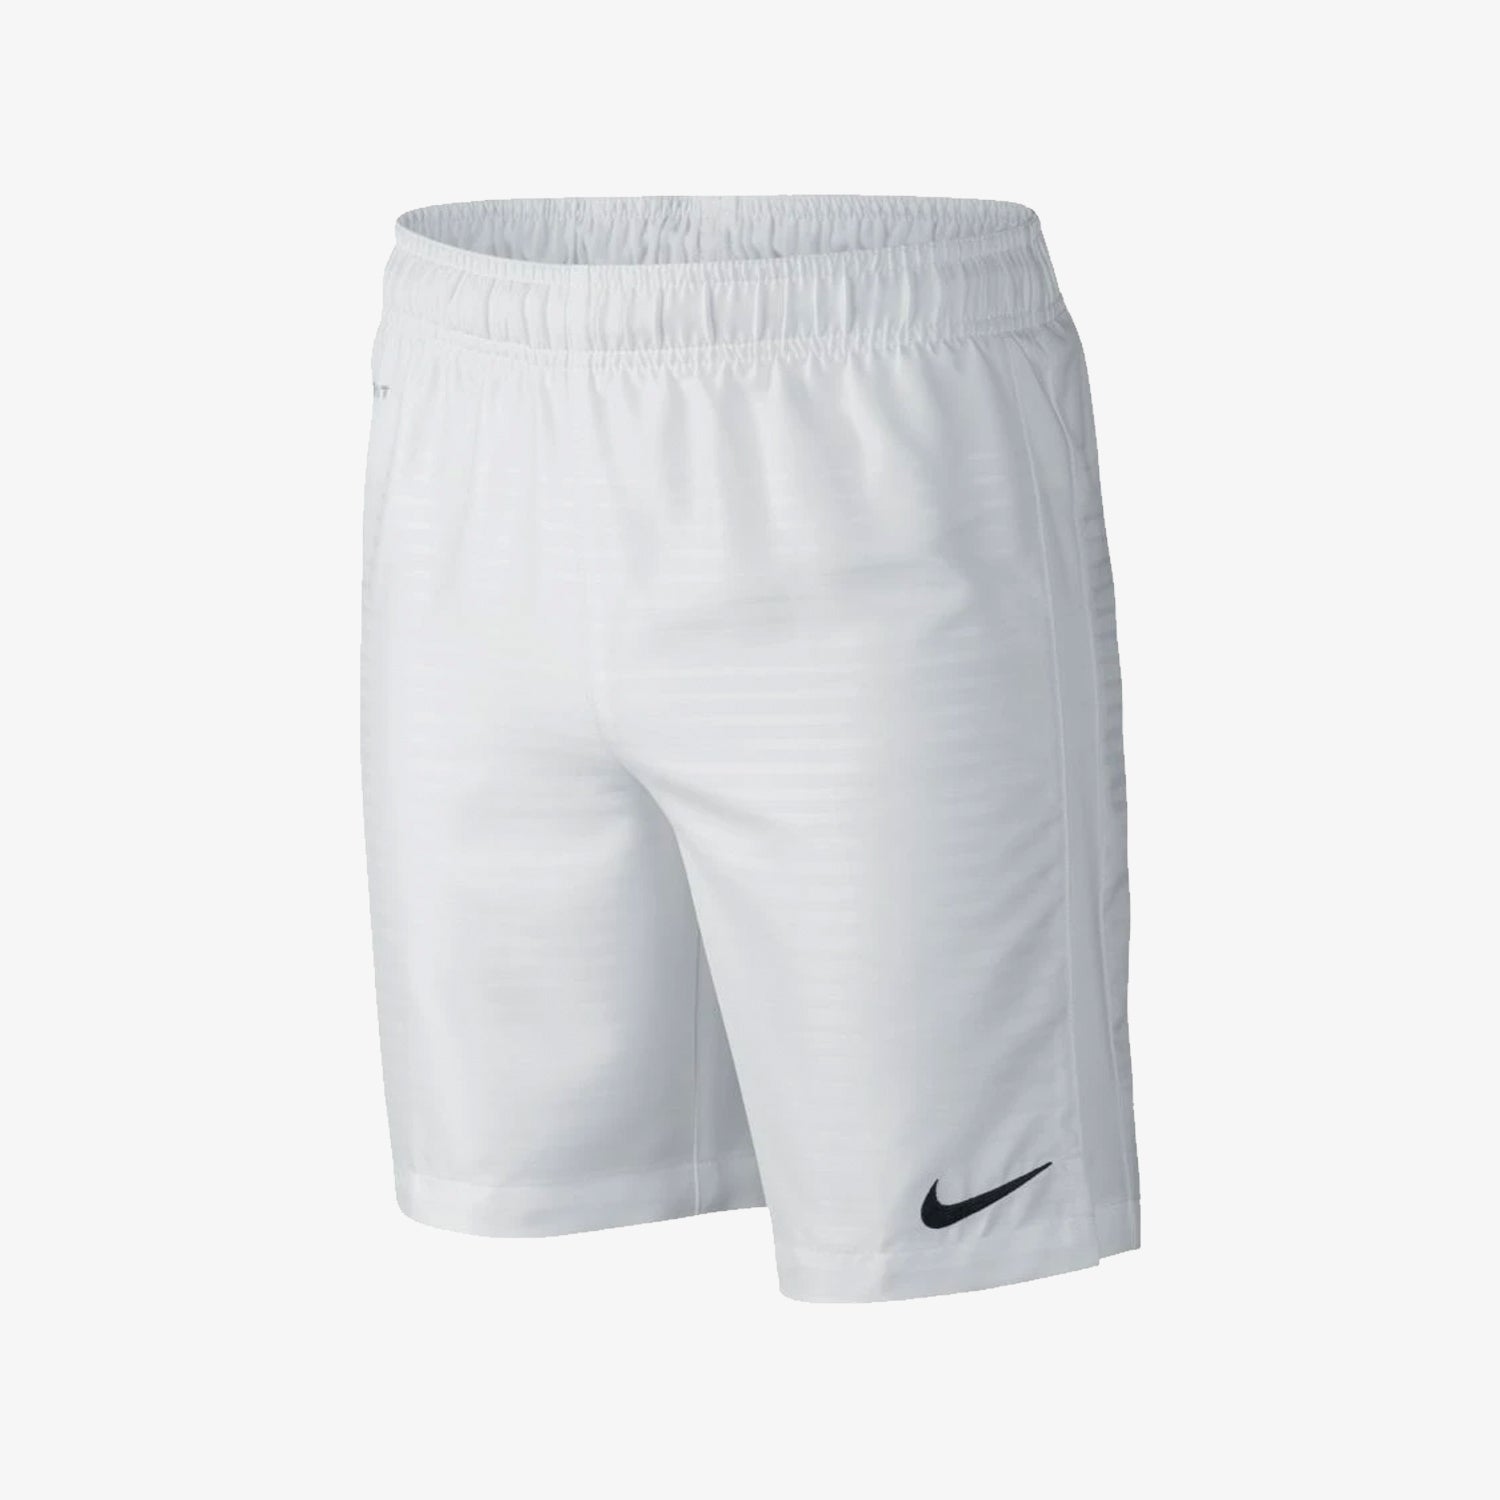 Nike Kid's Max Graphic Woven Soccer Shorts